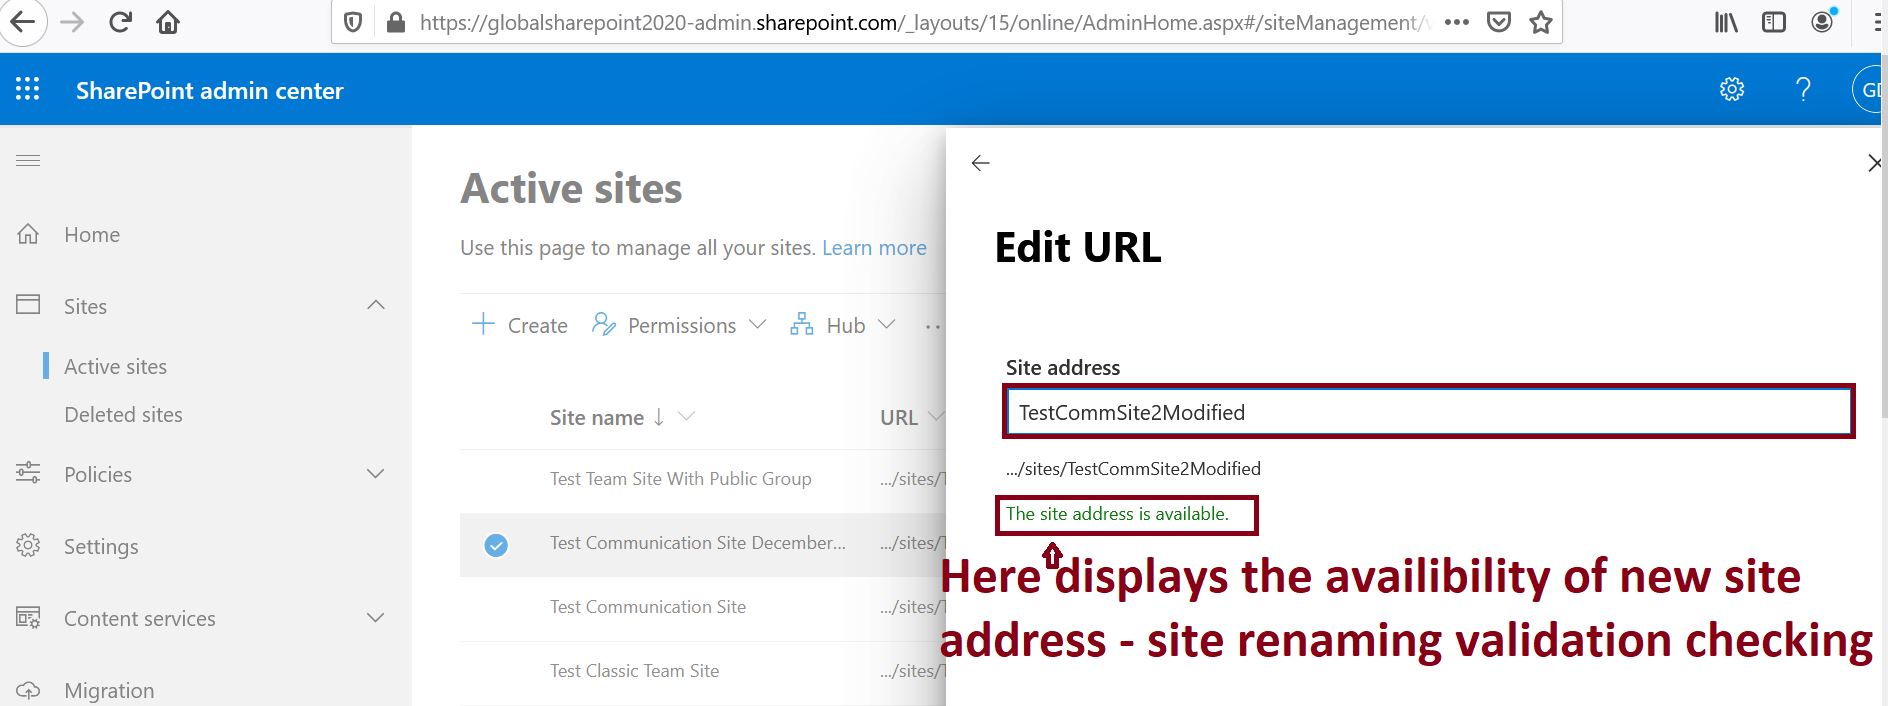 Site renaming validation while editing the site URL in SharePoint Online